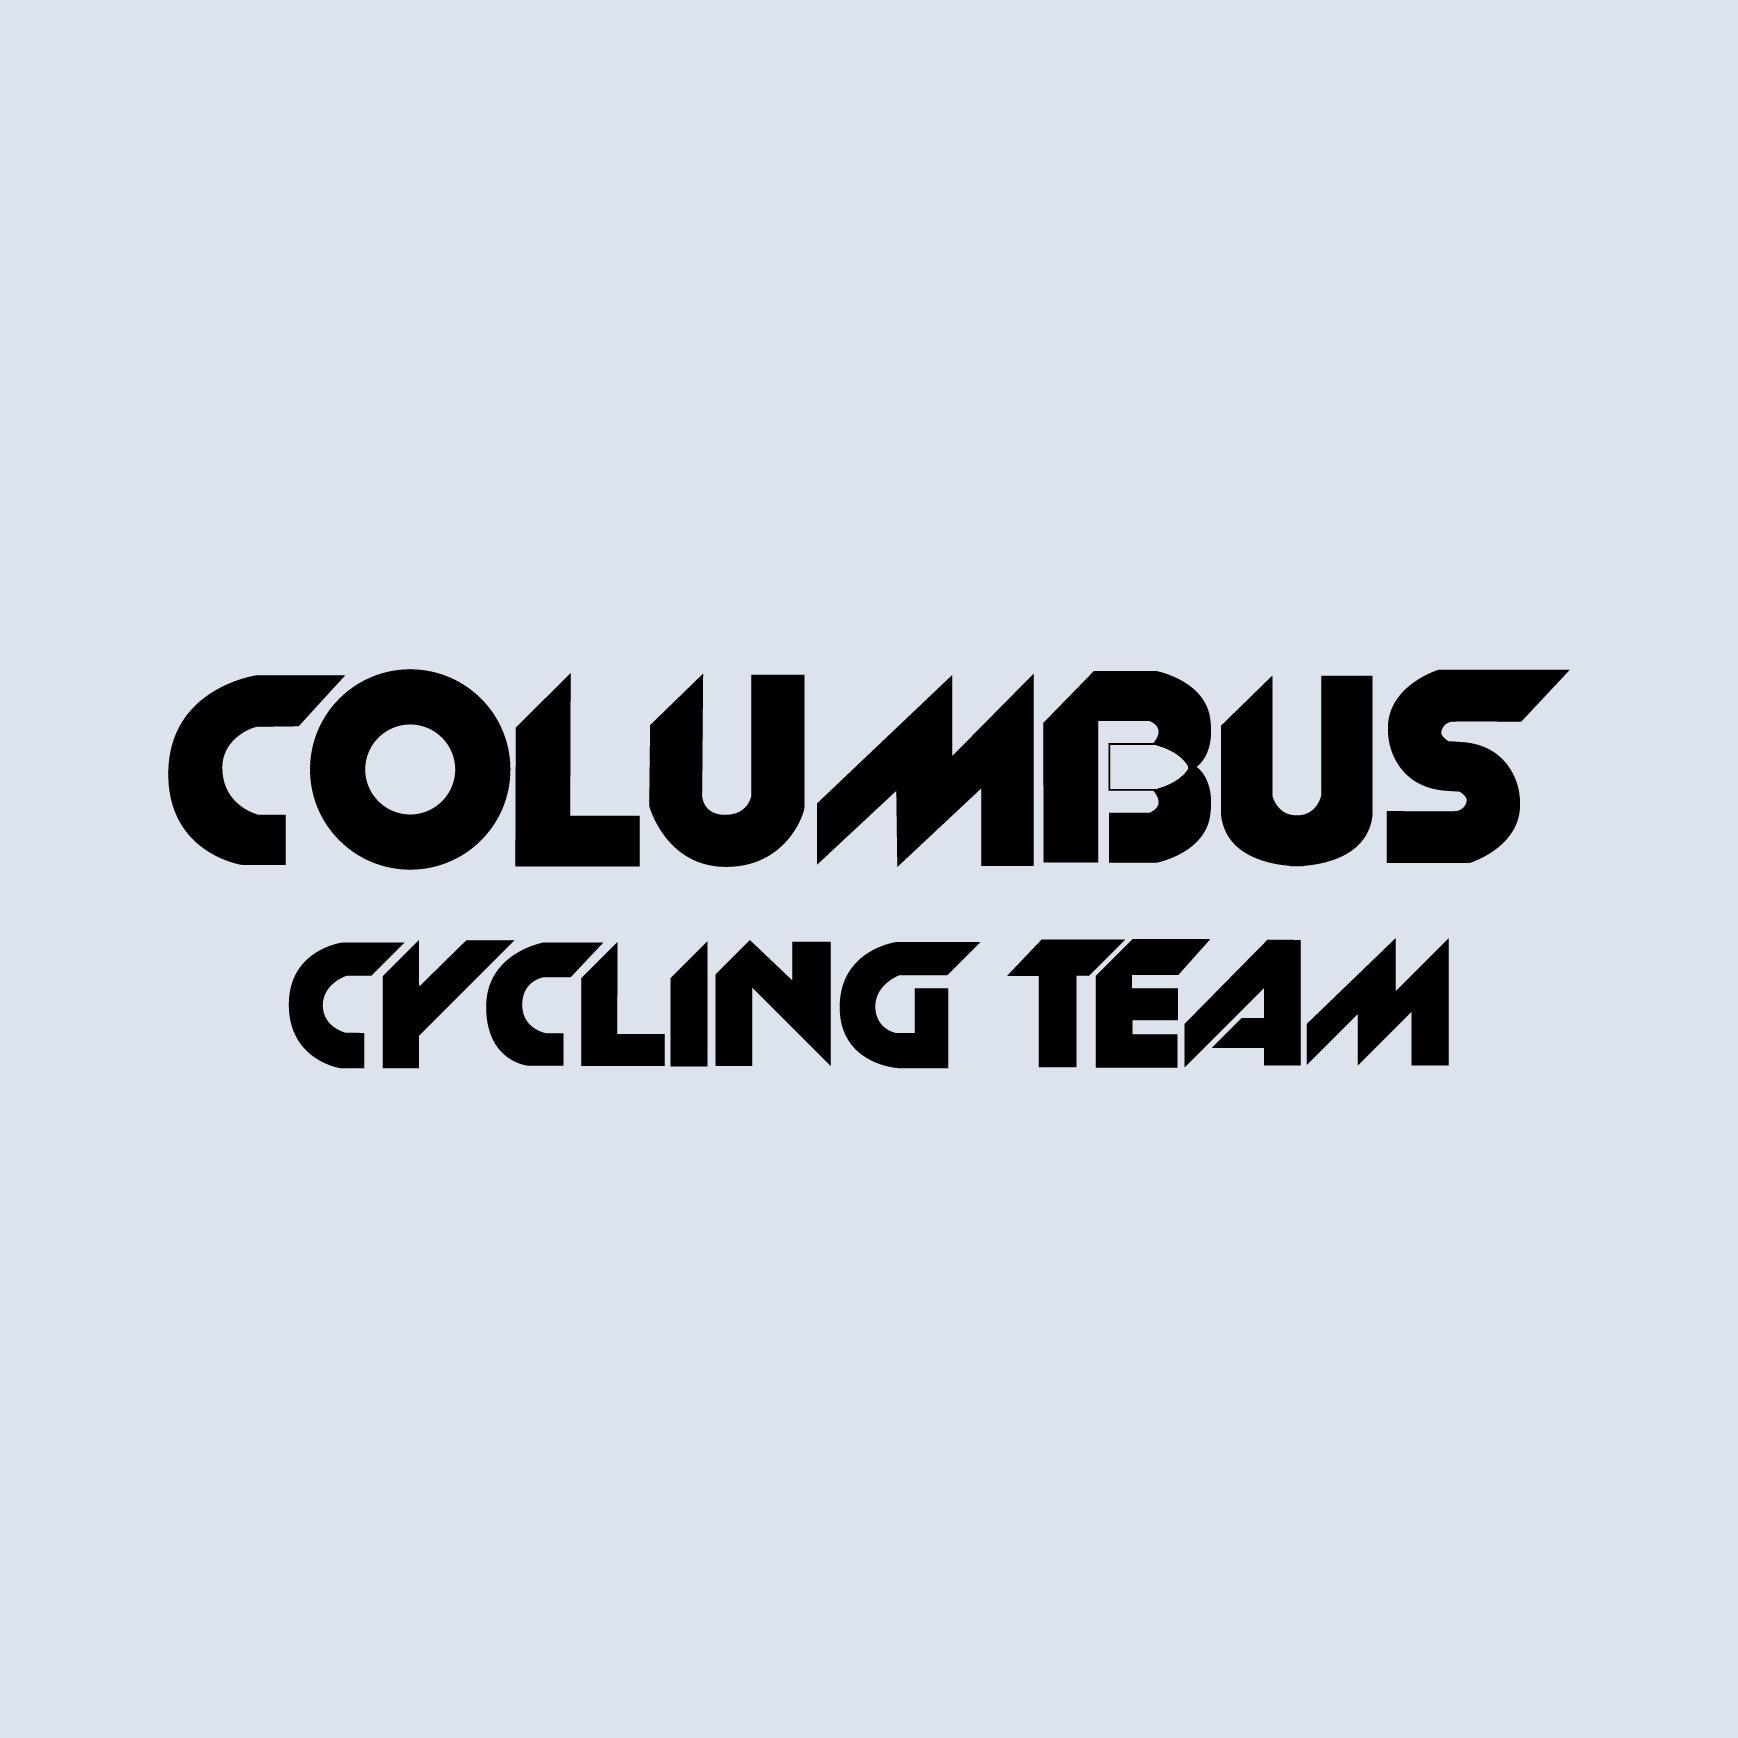 Club Image for COLUMBUS CYCLING TEAM